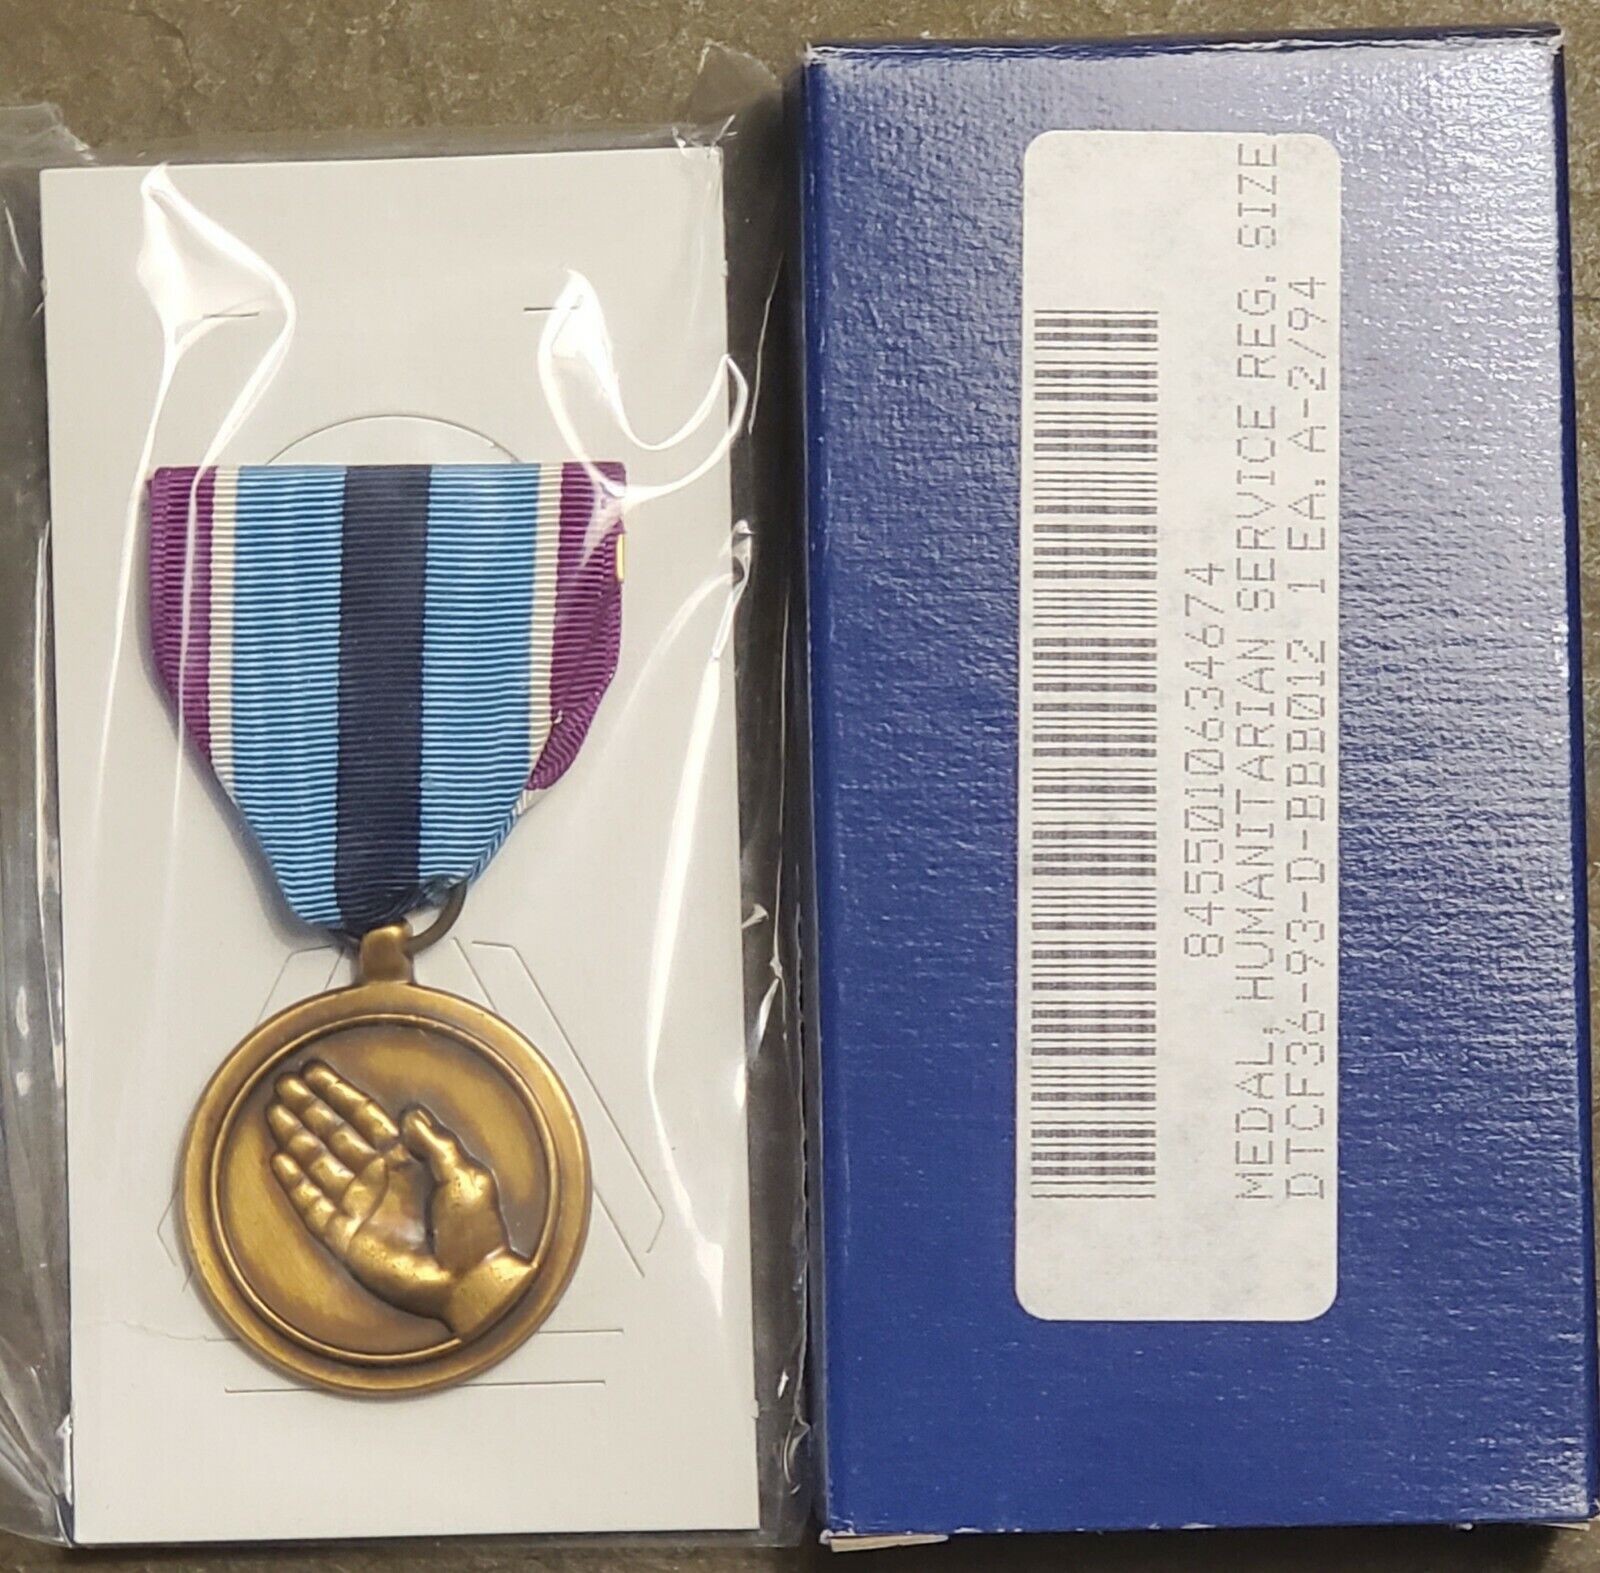 HUMANITARIAN SERVICE MEDAL - UNITED STATES ARMED FORCES NOS 1994 VINTAGE w/BOX